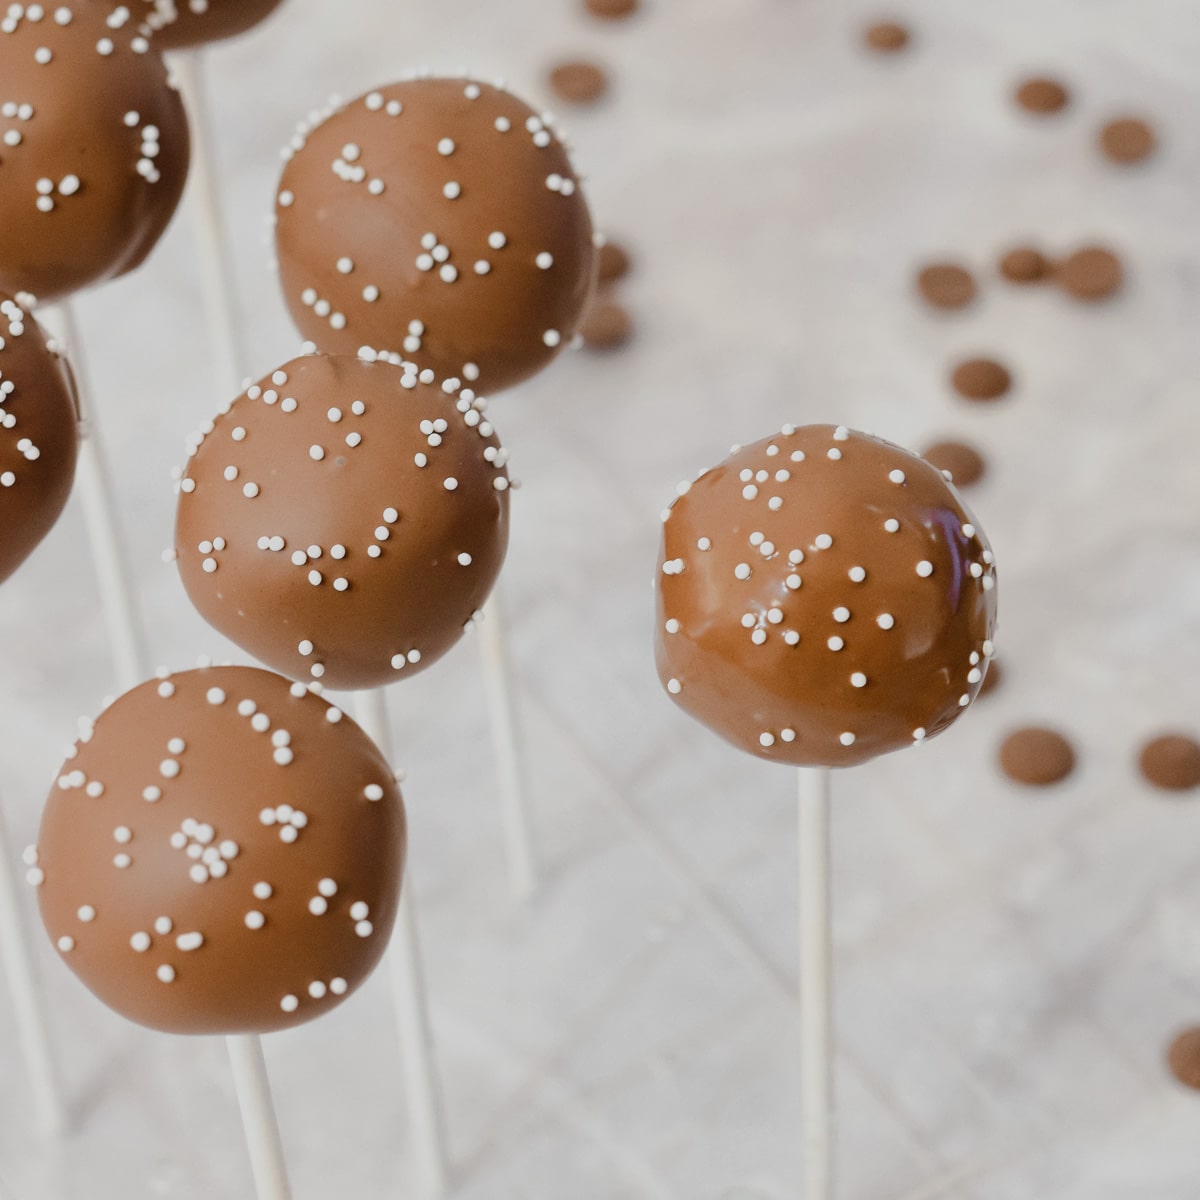 starbucks copycat chocolate coated chocolate cake pops with white sprinkles in stand